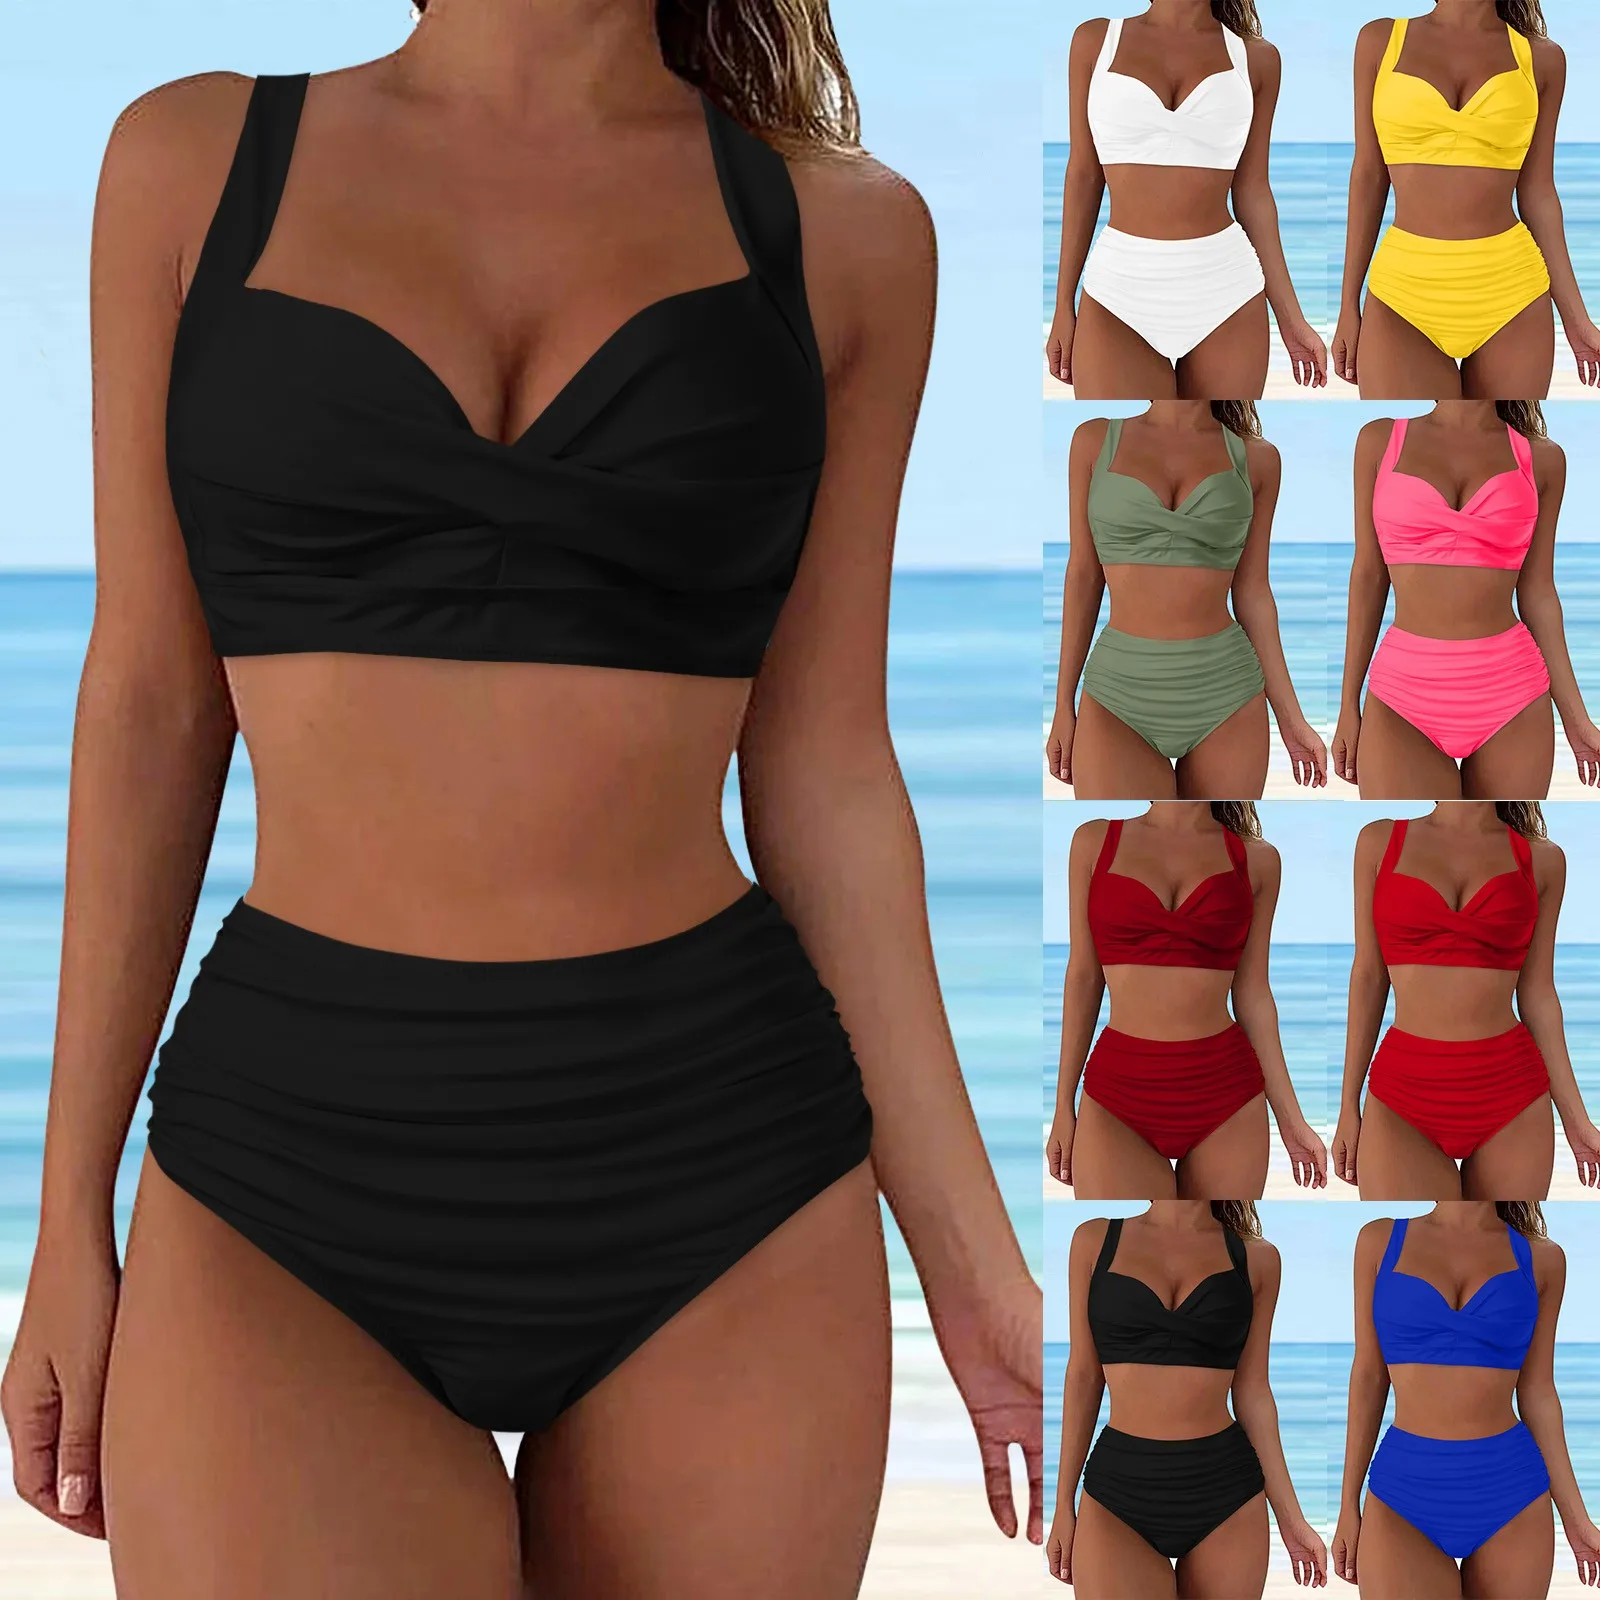 

Solid Colors Womens High Waisted Bikini Push Up Vintage Swimsuits Halter Top Tummy Control Ruched Bottom Two Piece Bathing Suits